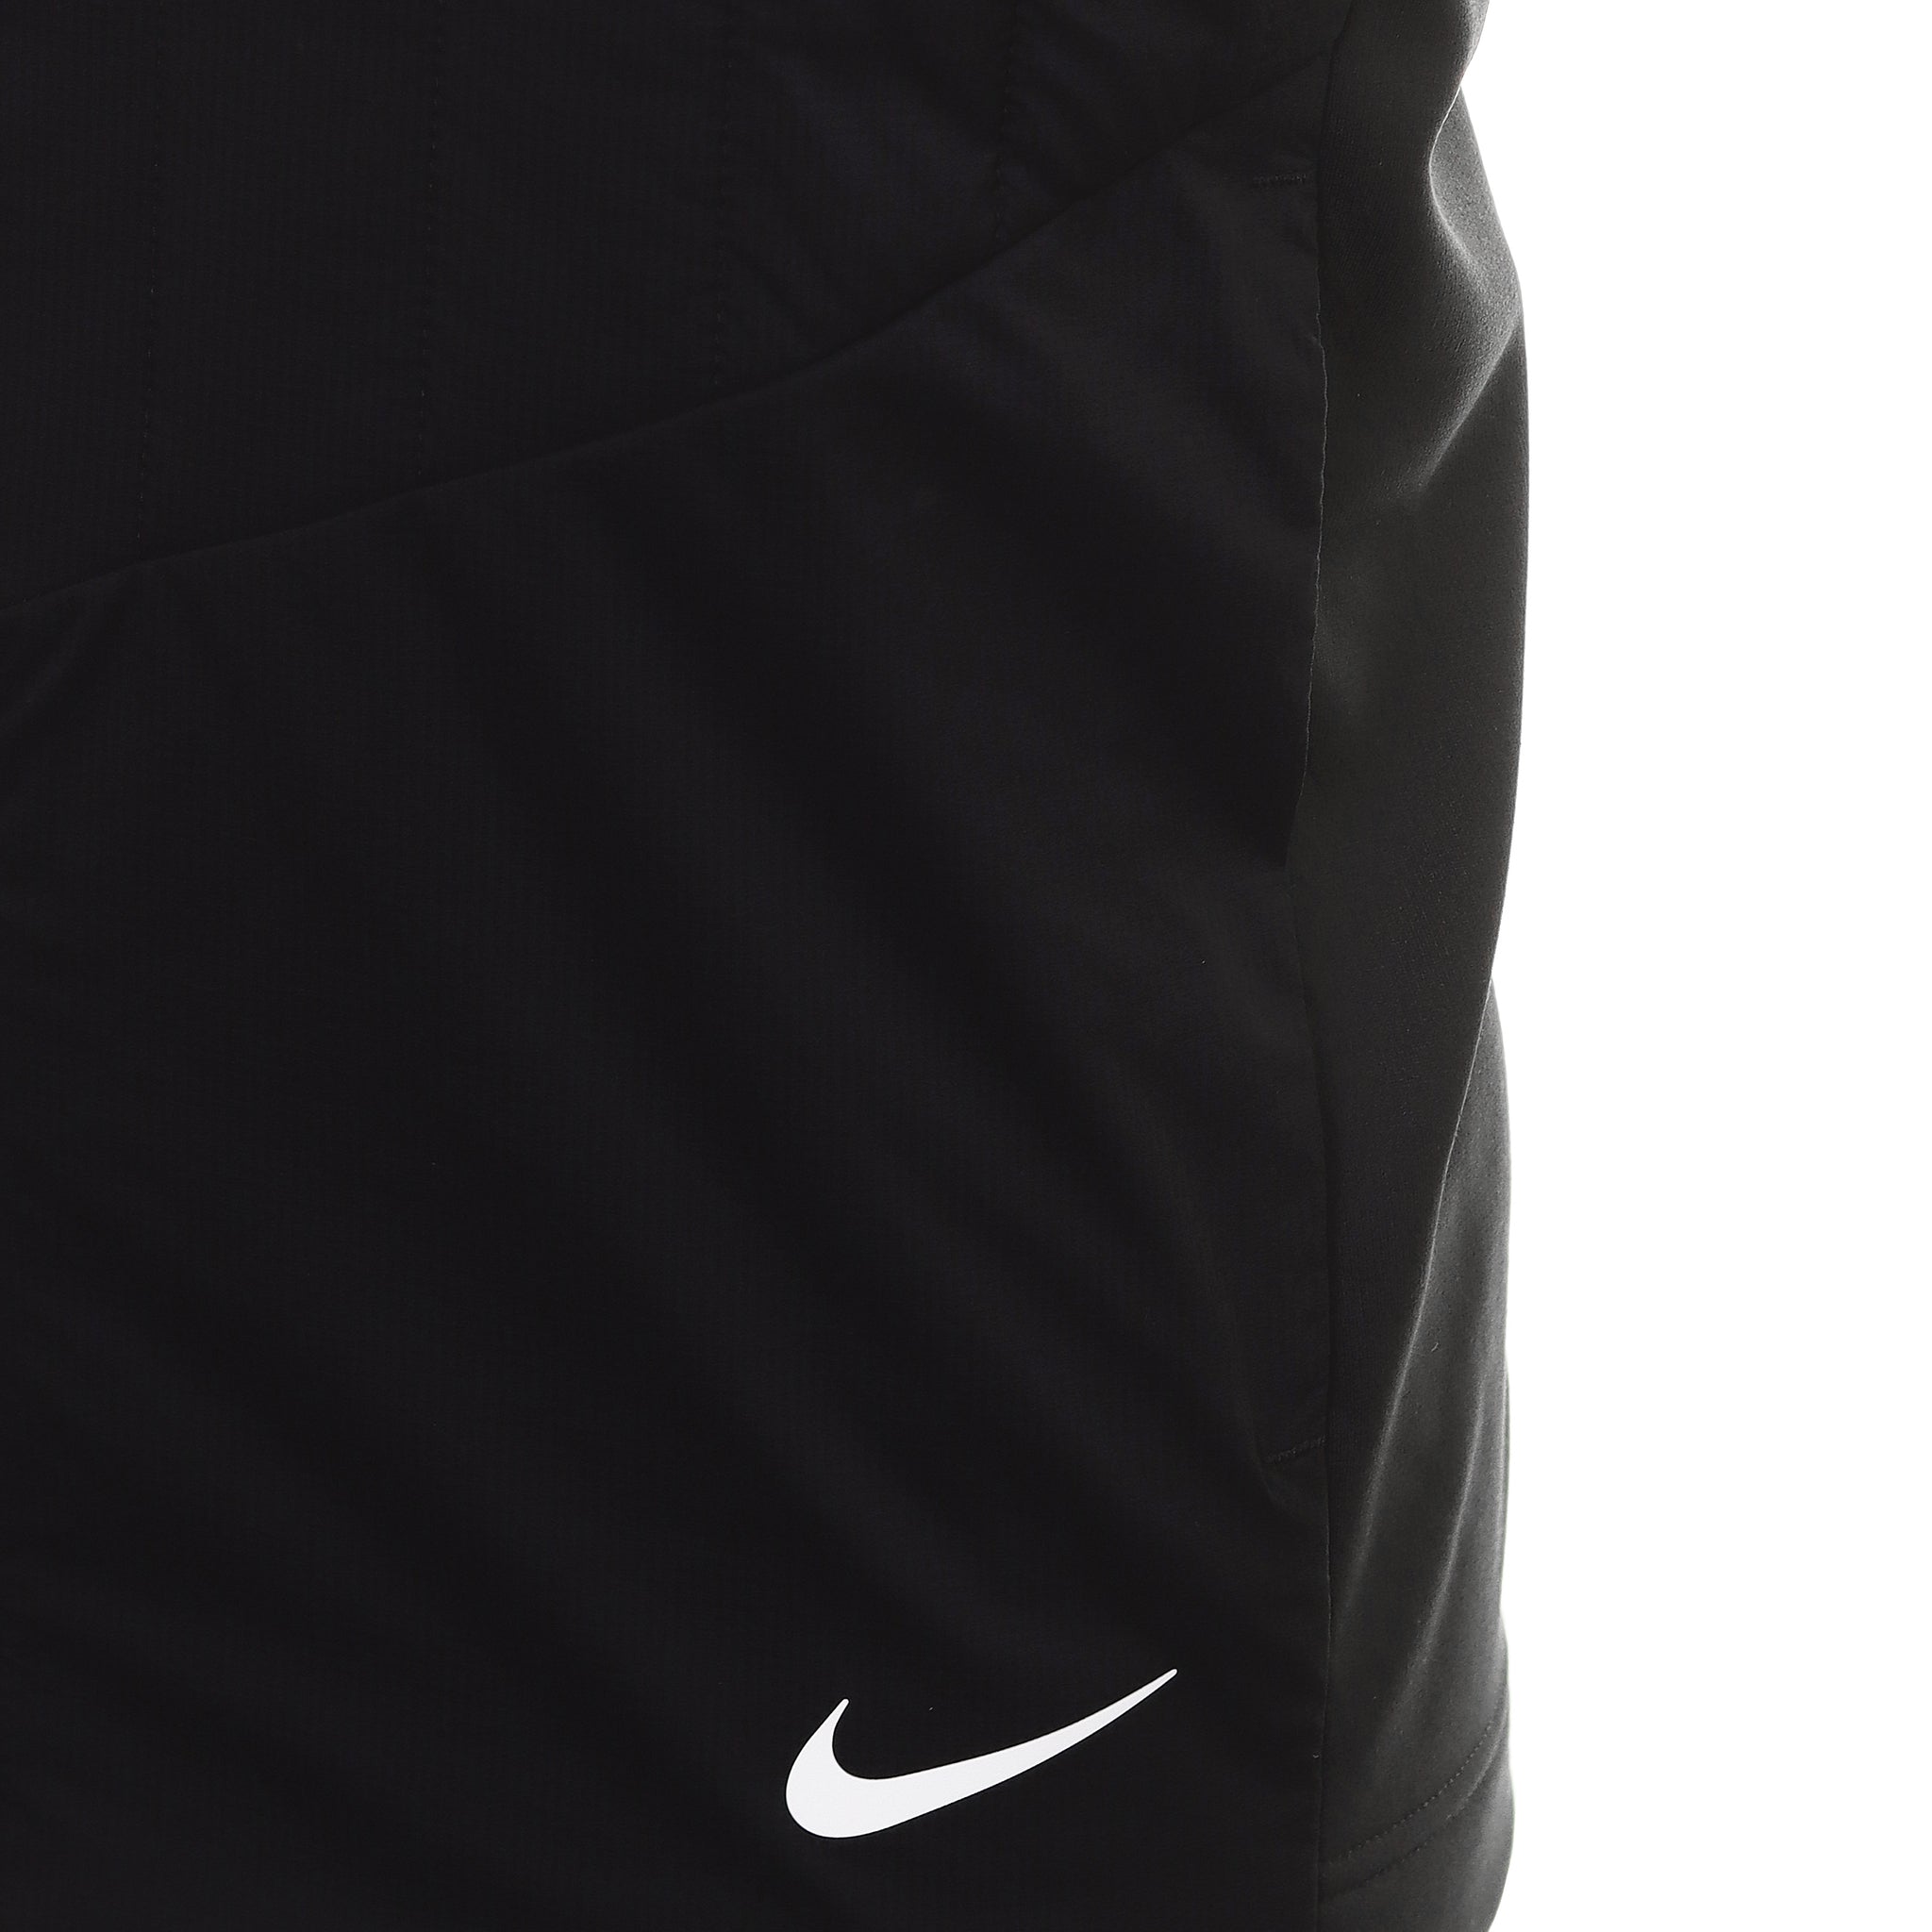 Nike Golf Therma-Fit ADV Repel Vest